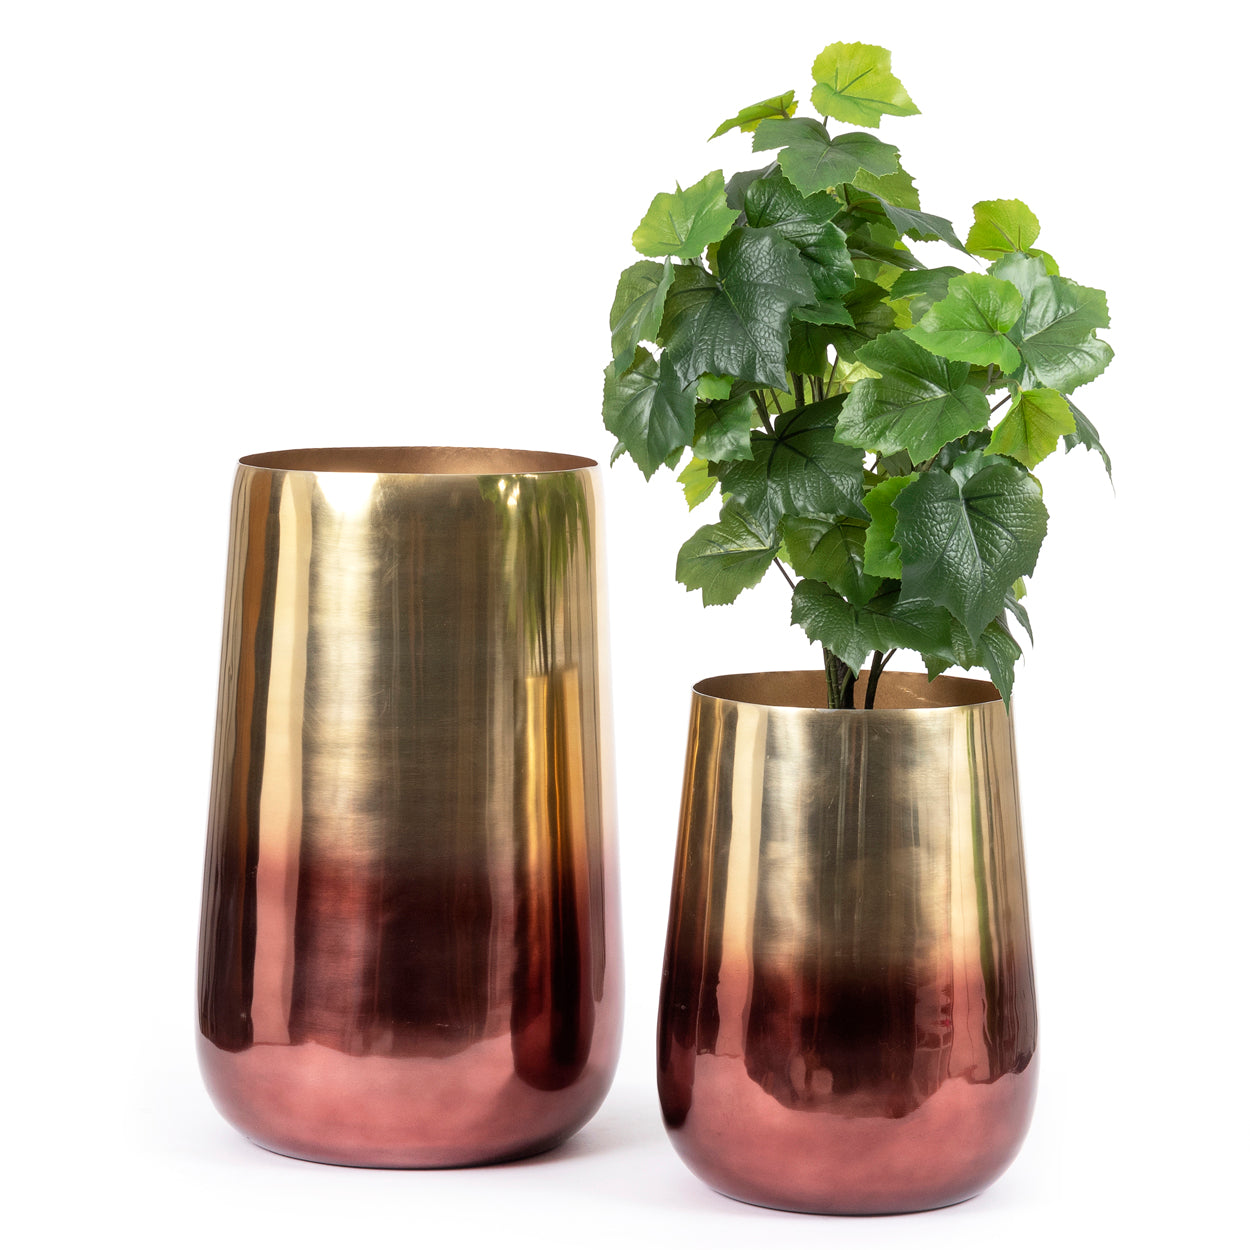 THE TWO TONE Brass Planter wto pieces with plant